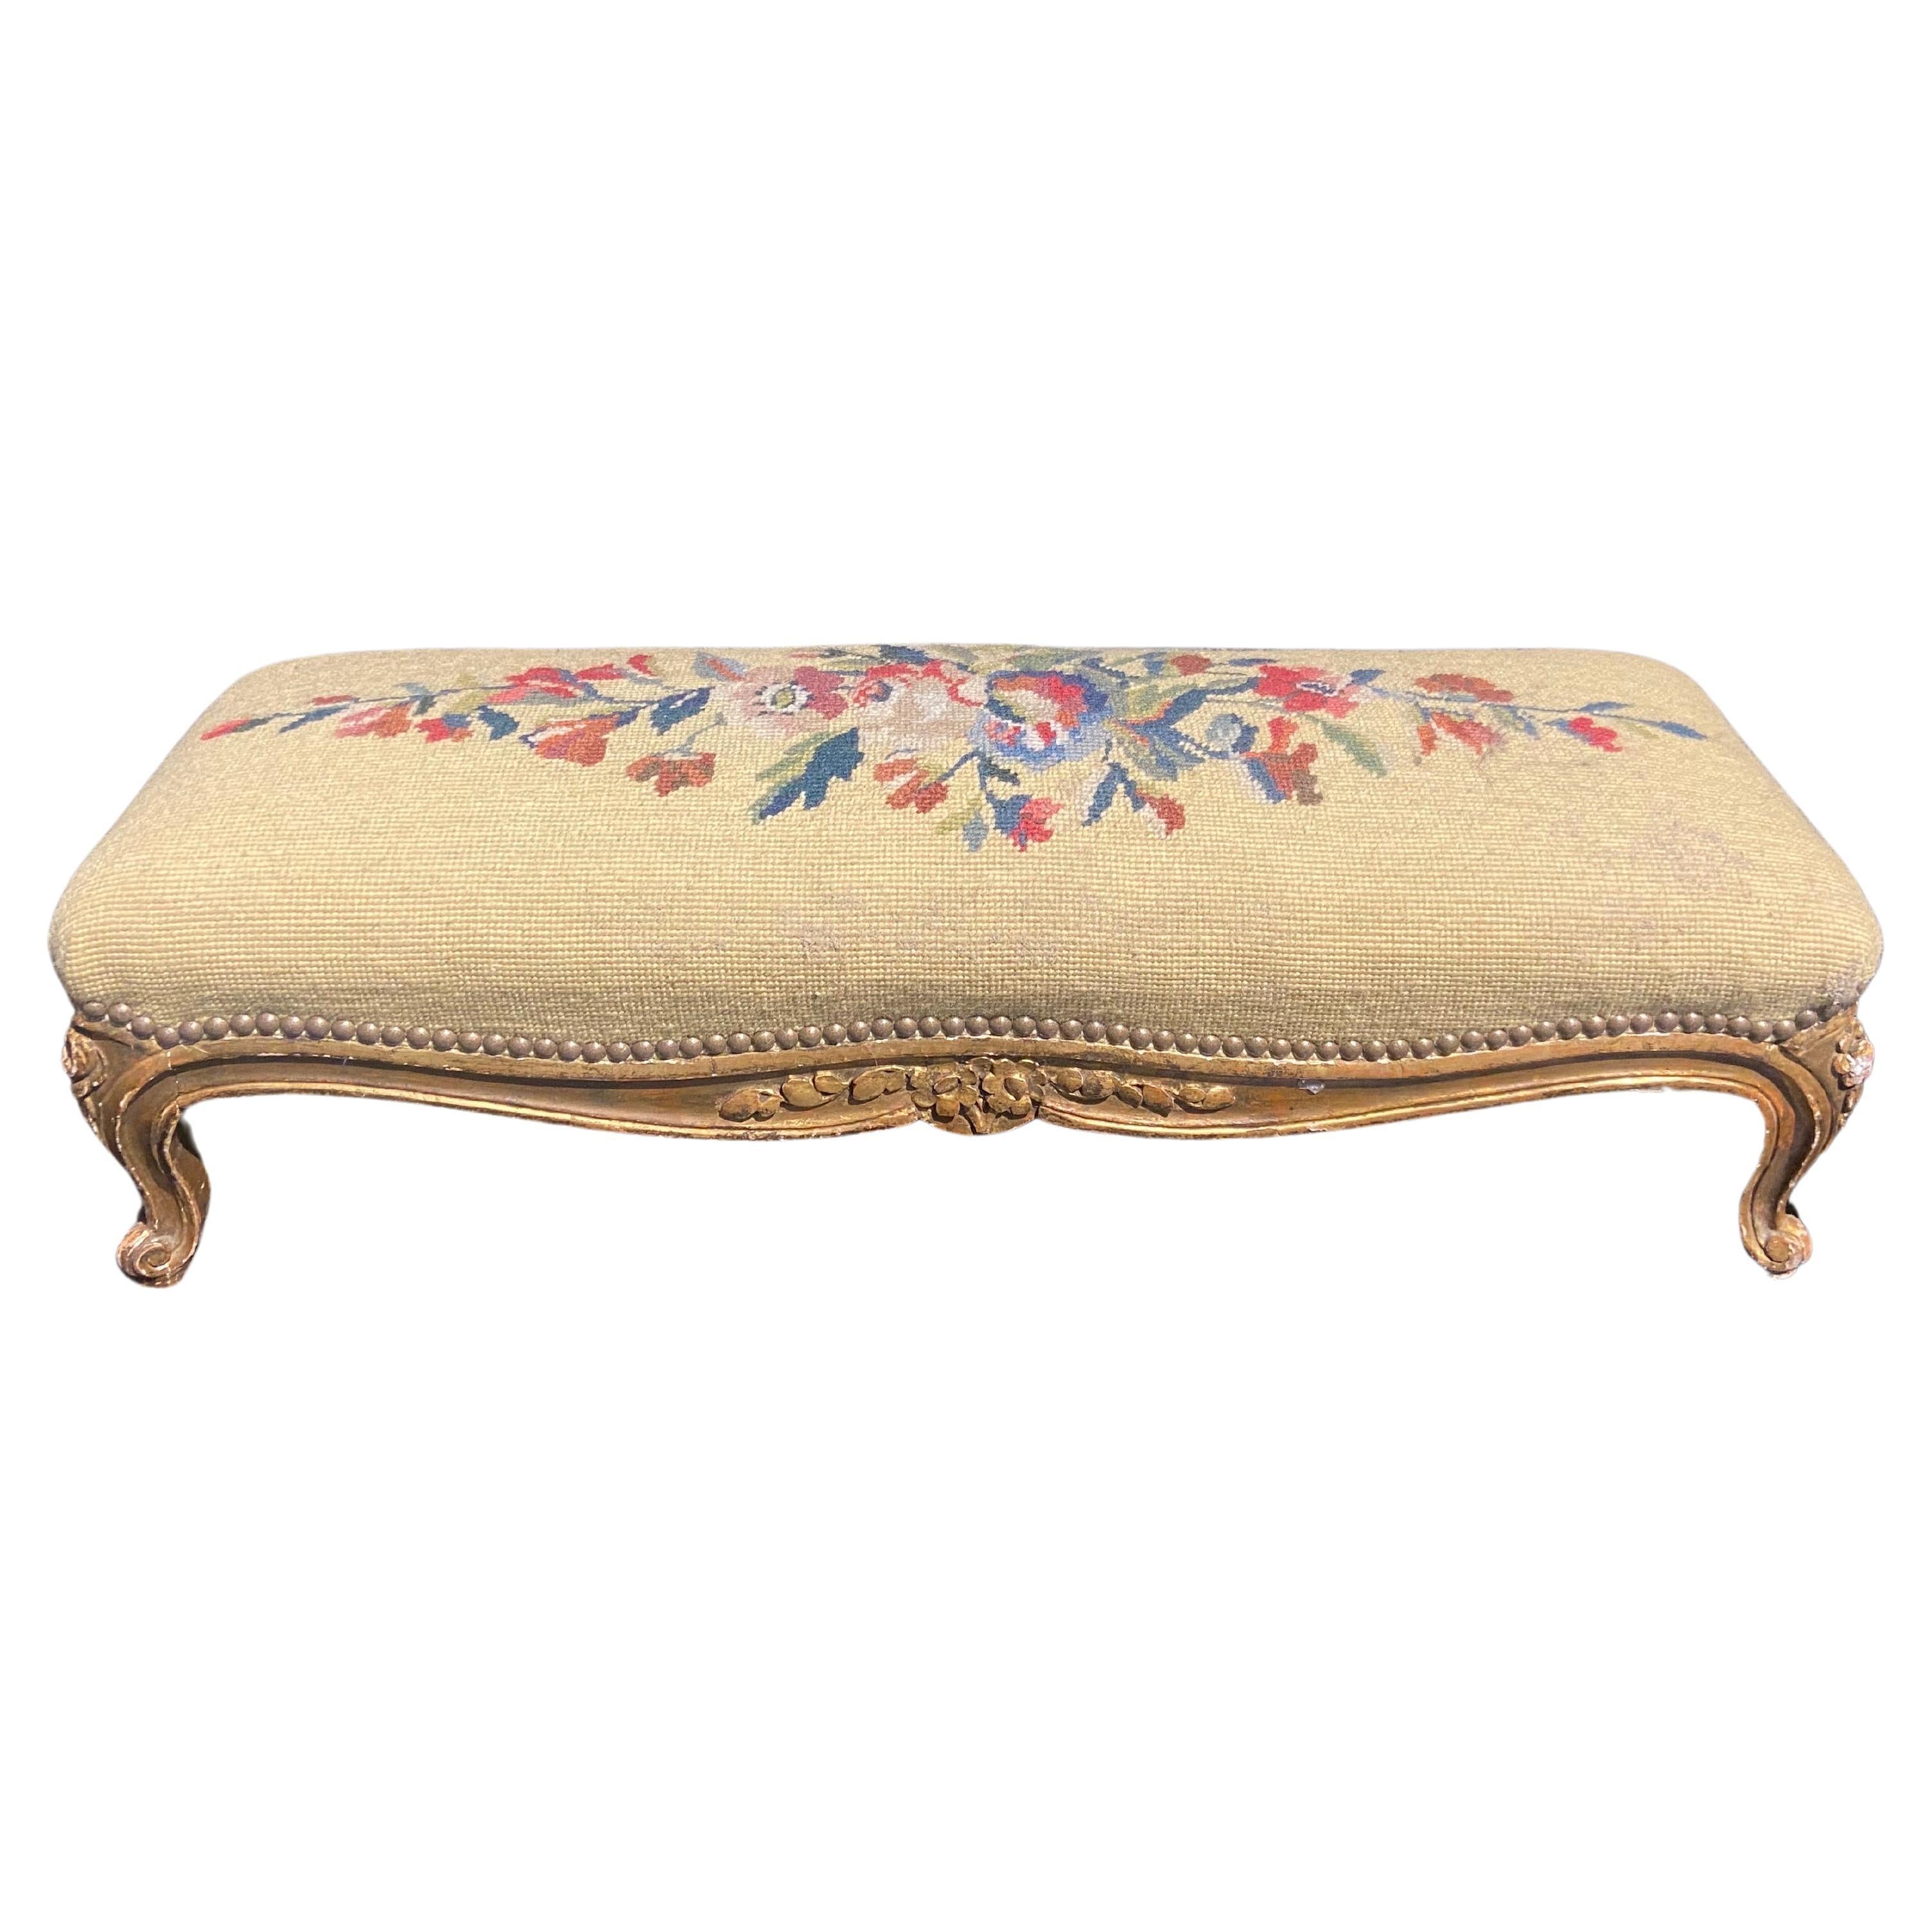 19th Century French Louis XV Style Hand Carved Gilt Wood Foot Stool Tapestry